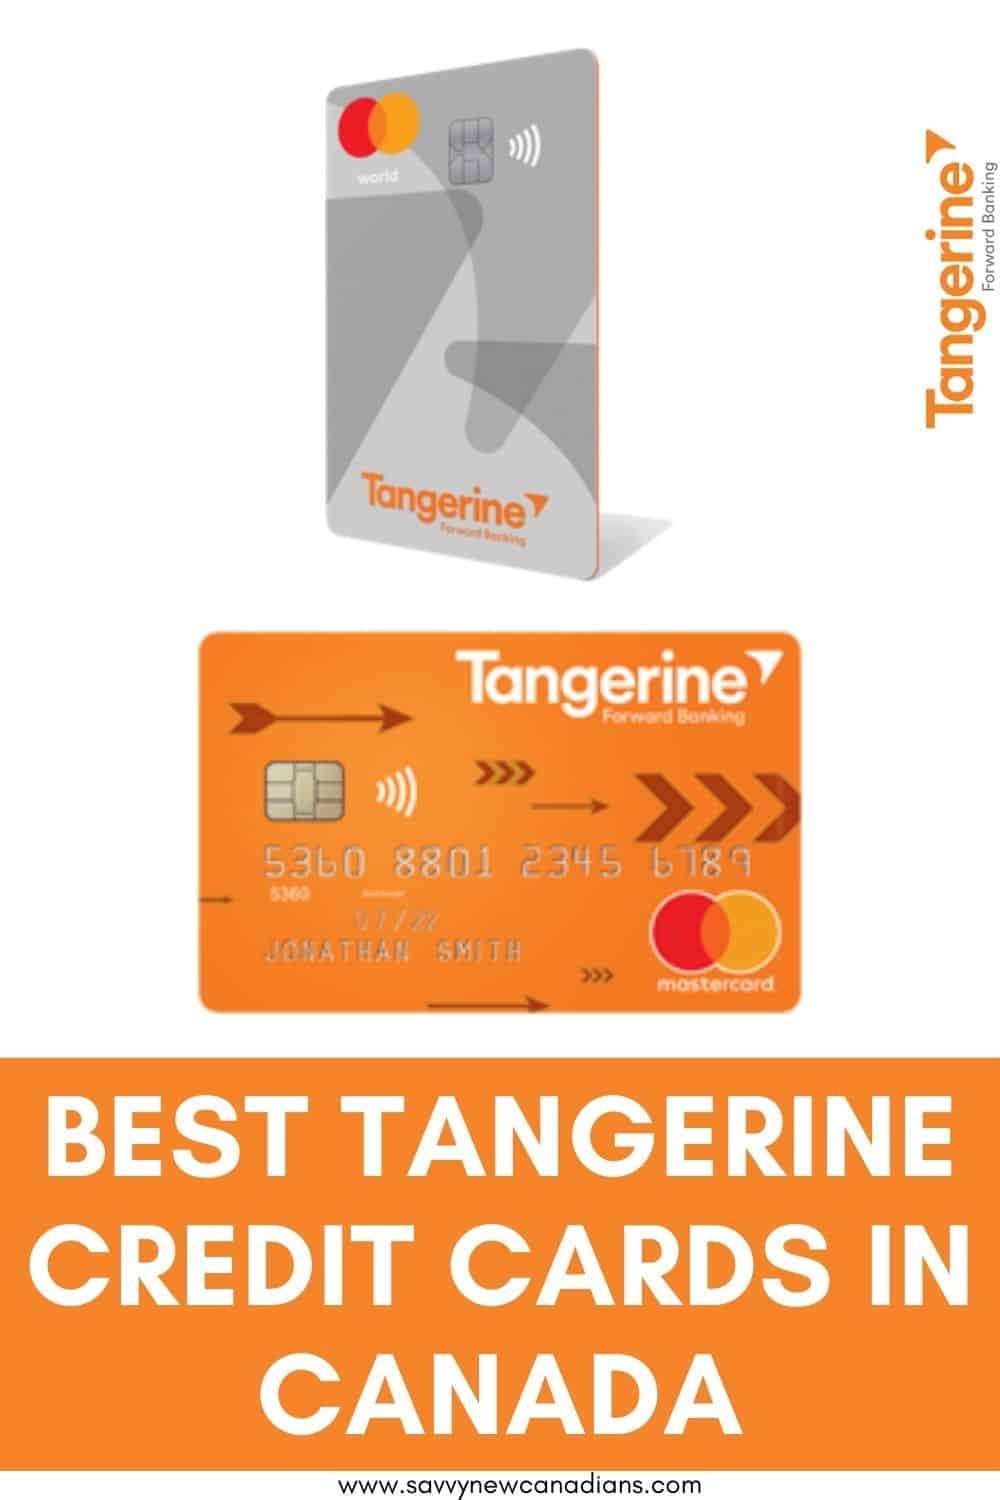 Best Tangerine Credit Cards in Canada for 2022